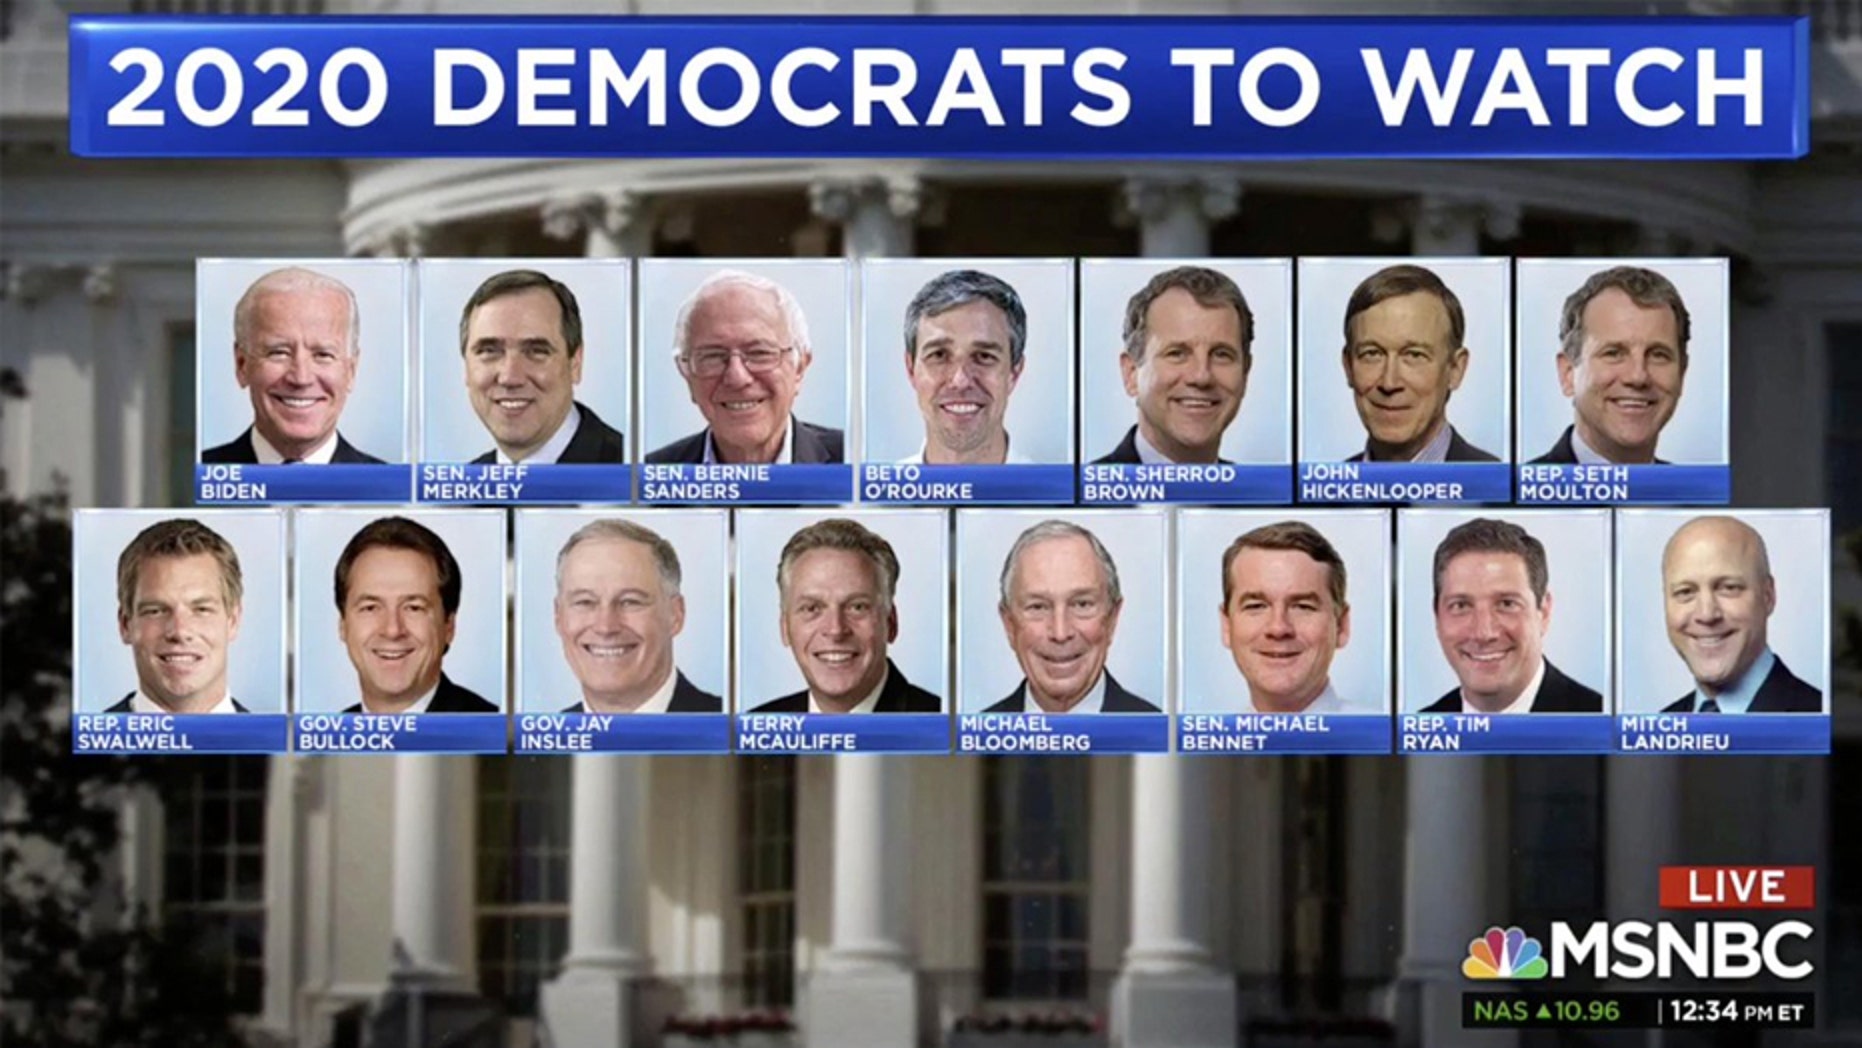 MSNBC slammed for graphic showing only white, male potential 2020